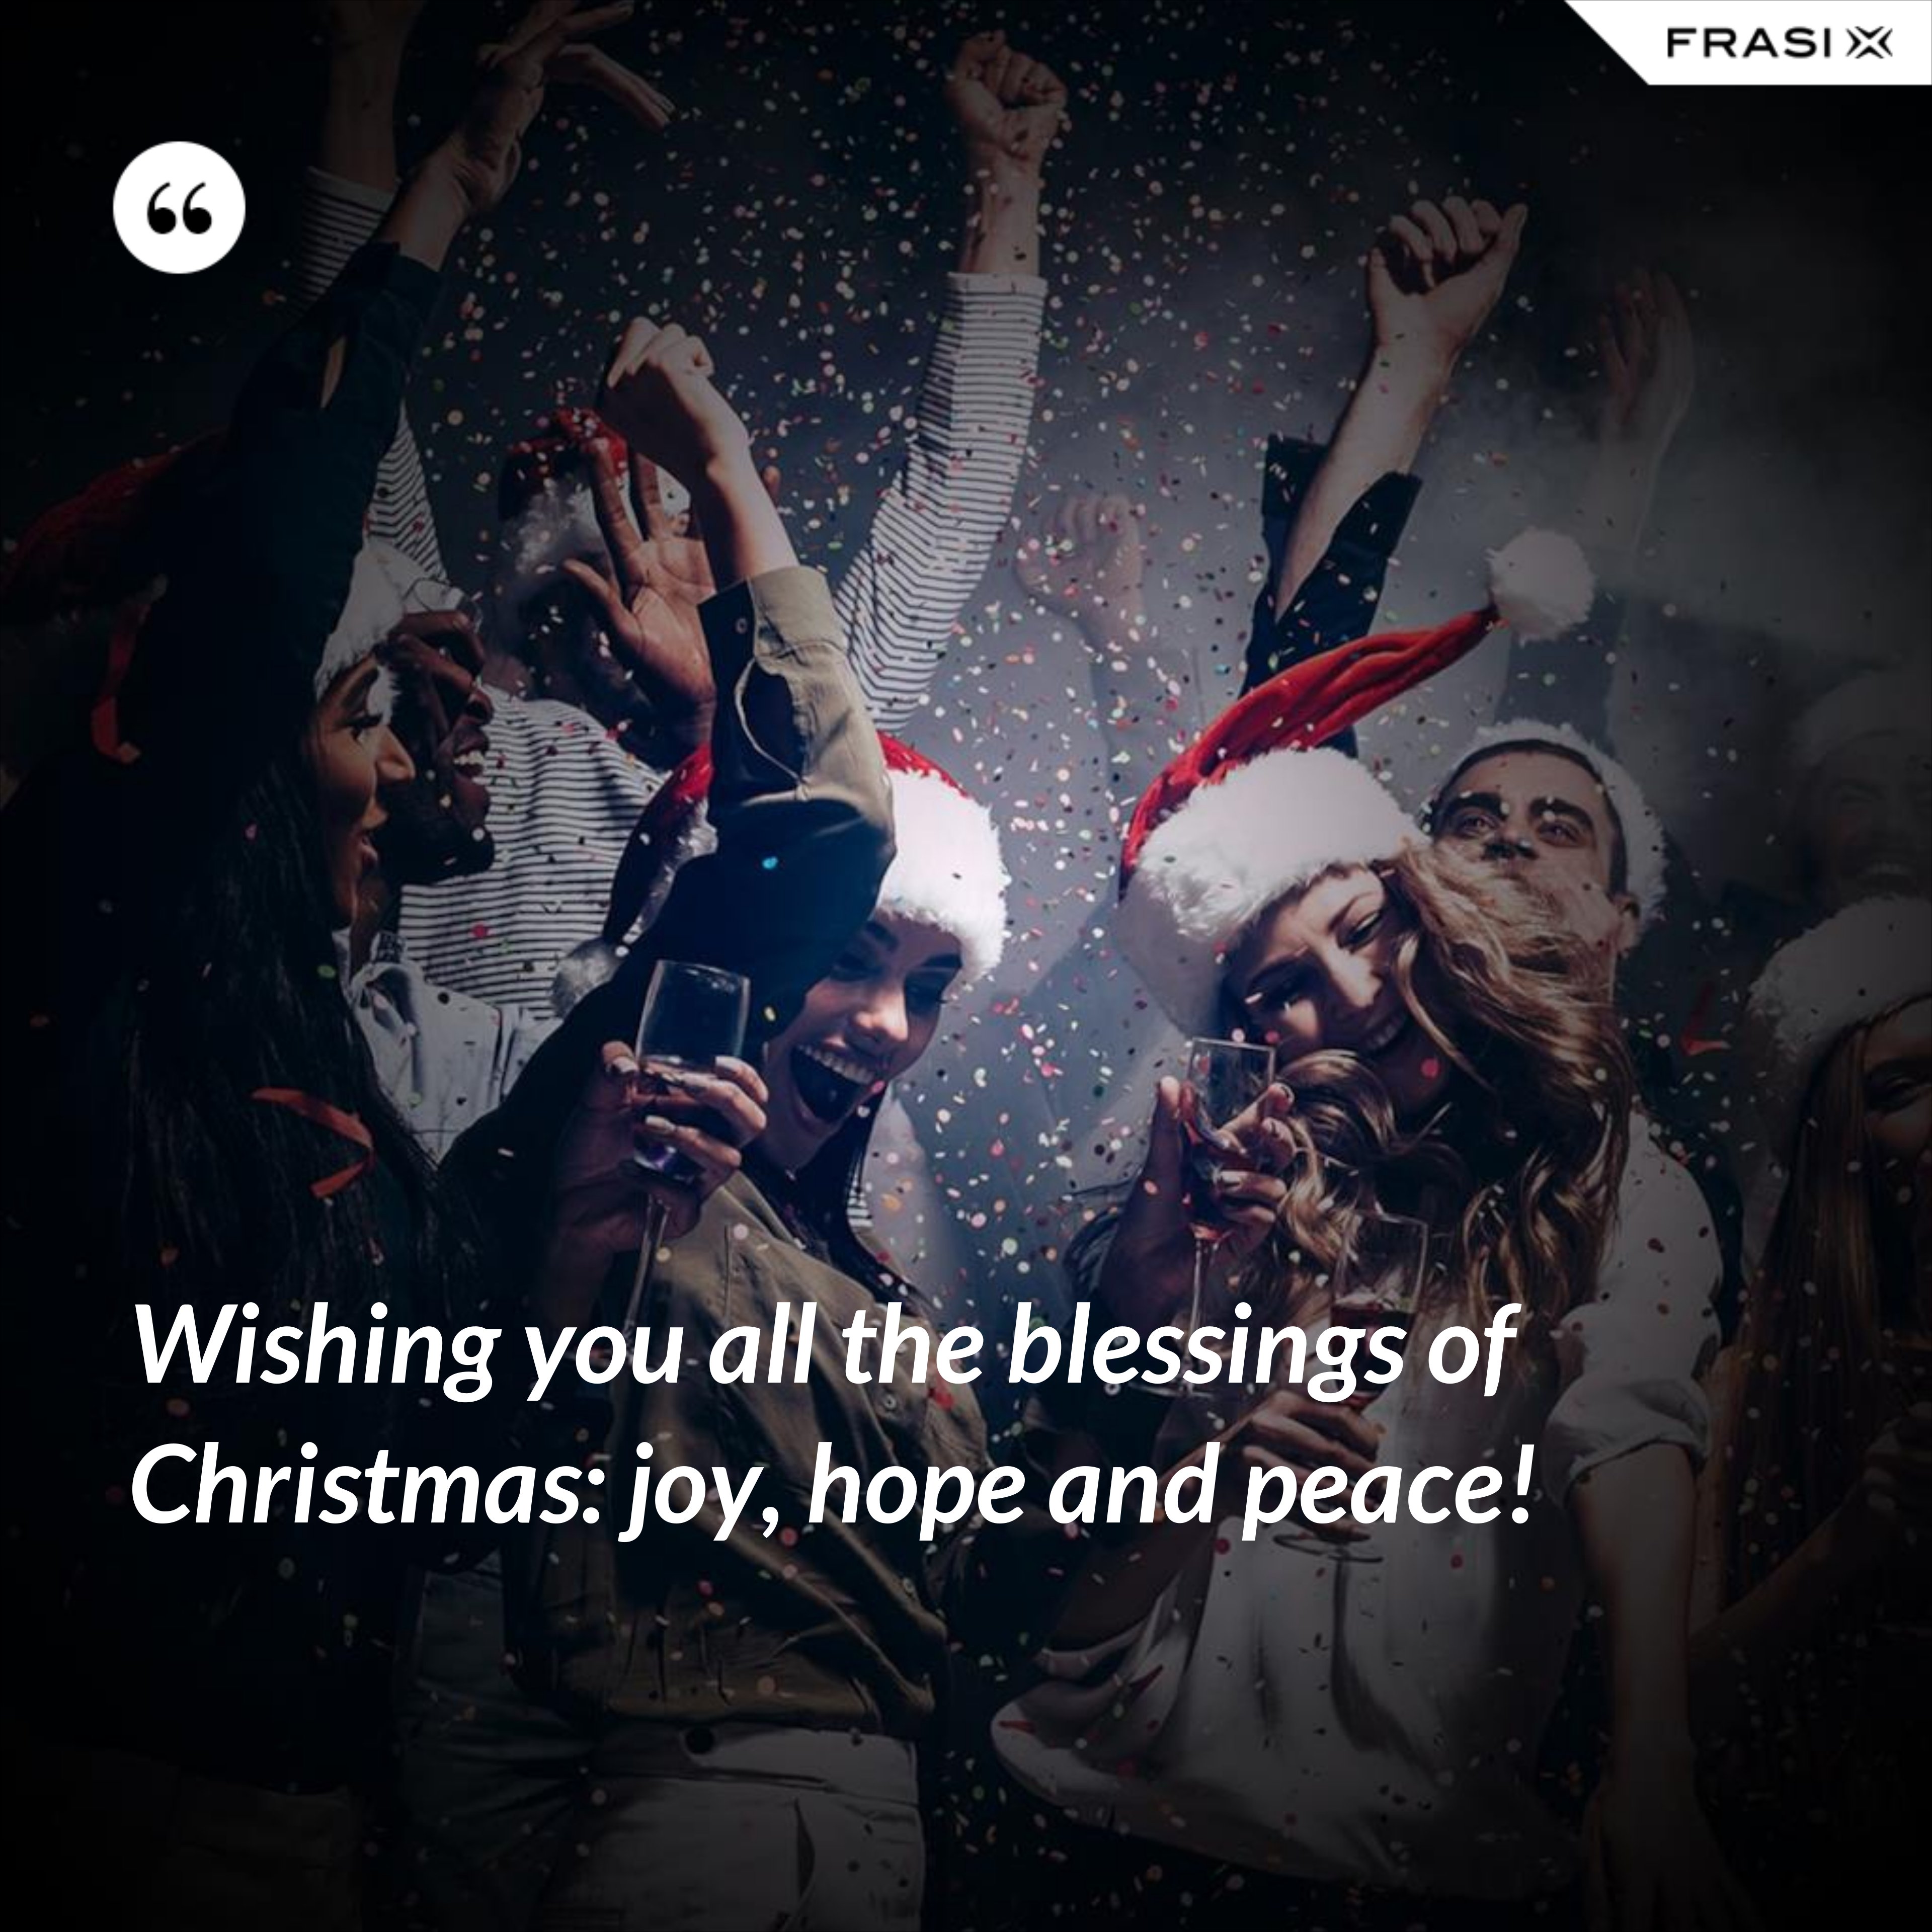 Wishing you all the blessings of Christmas: joy, hope and peace! - Anonimo